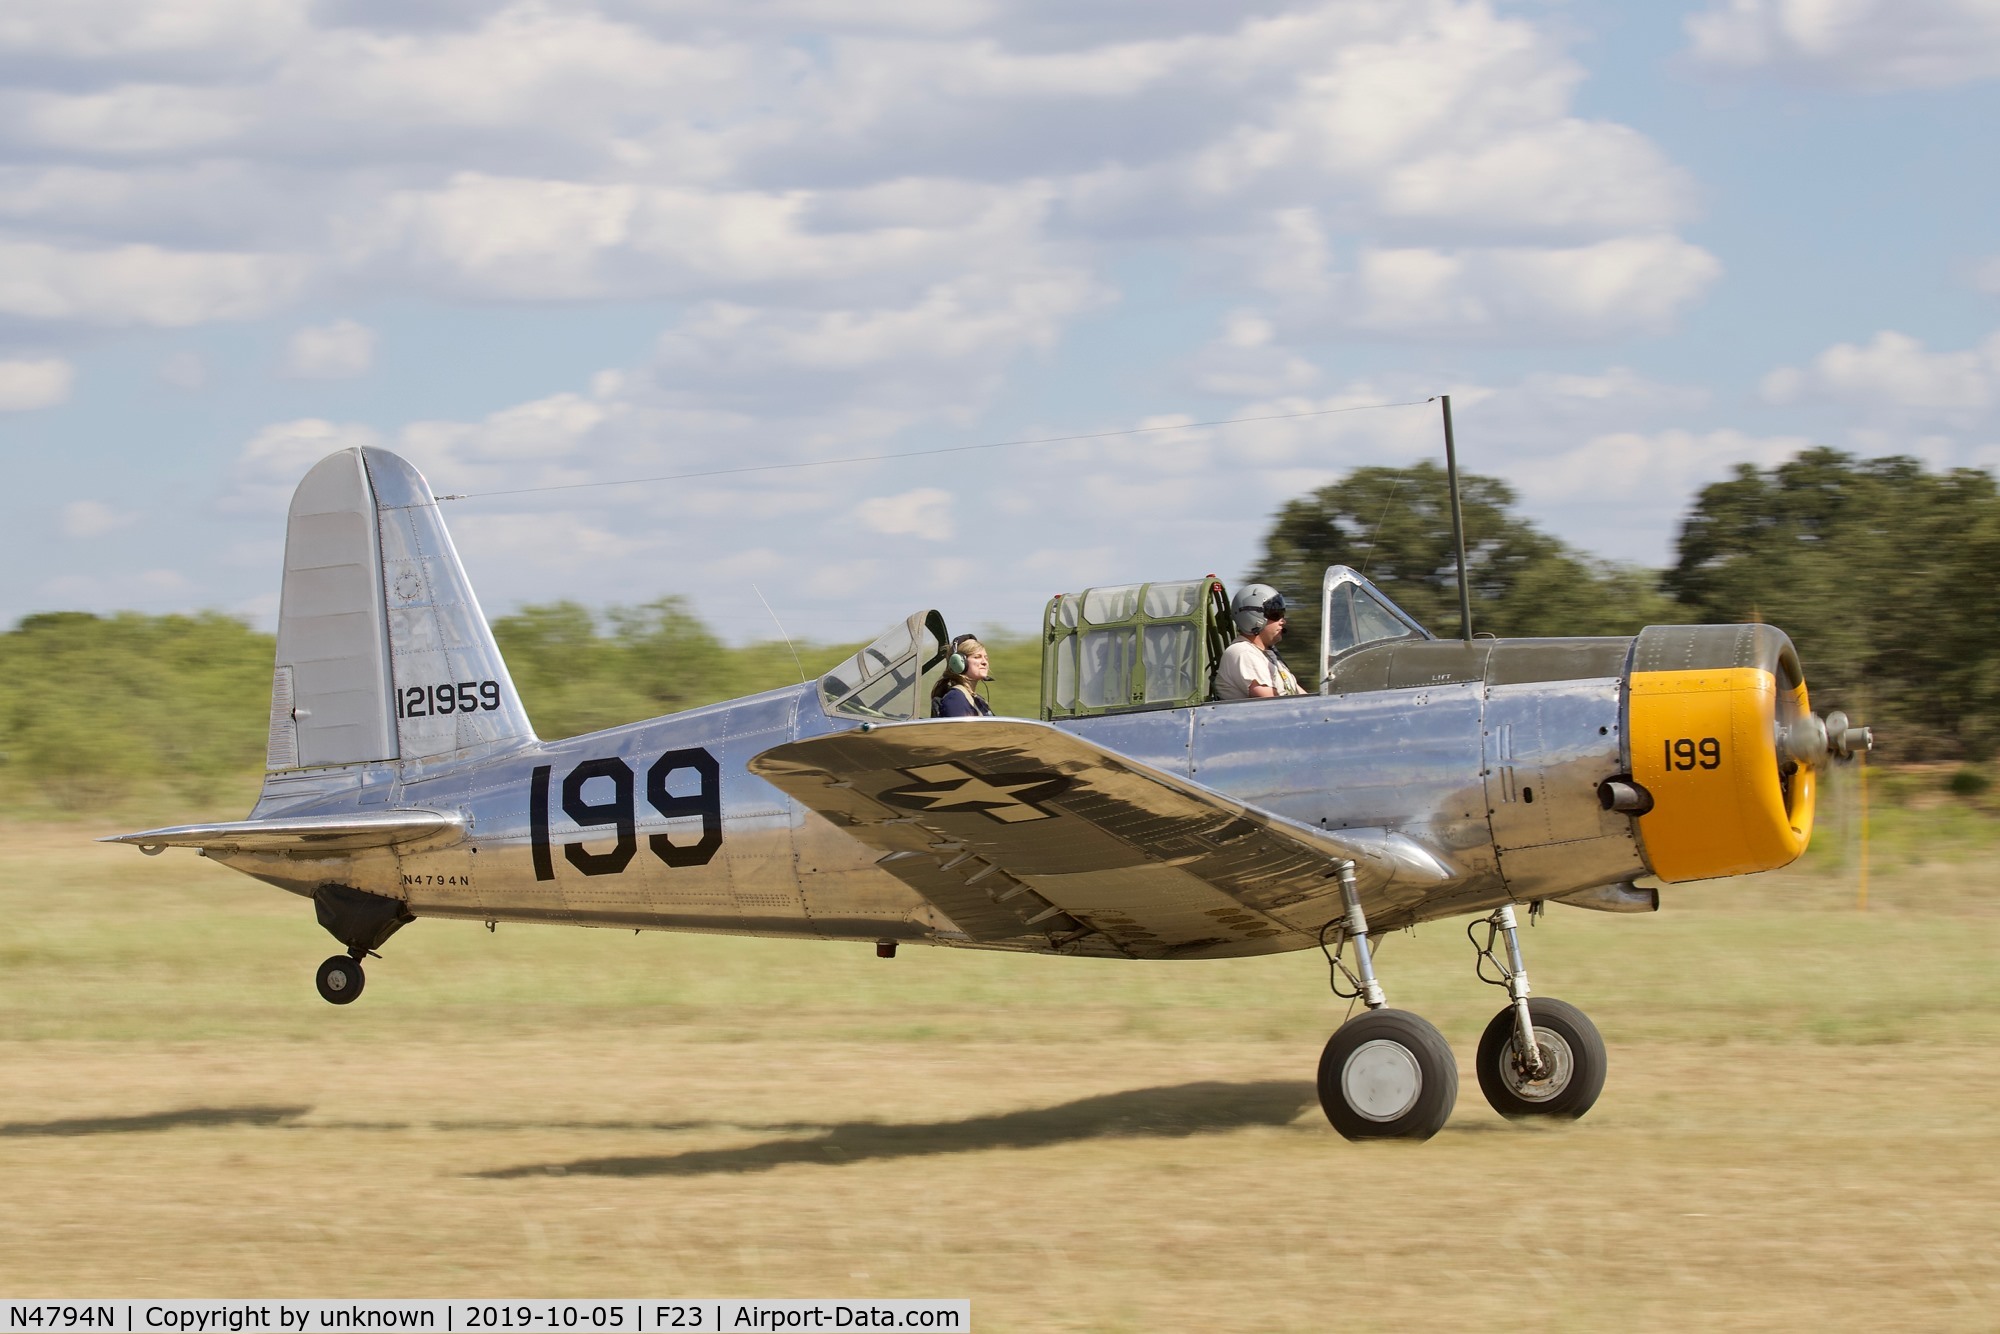 N4794N, 1942 Consolidated Vultee BT-13A C/N 5798, takeoff after Ranger air show